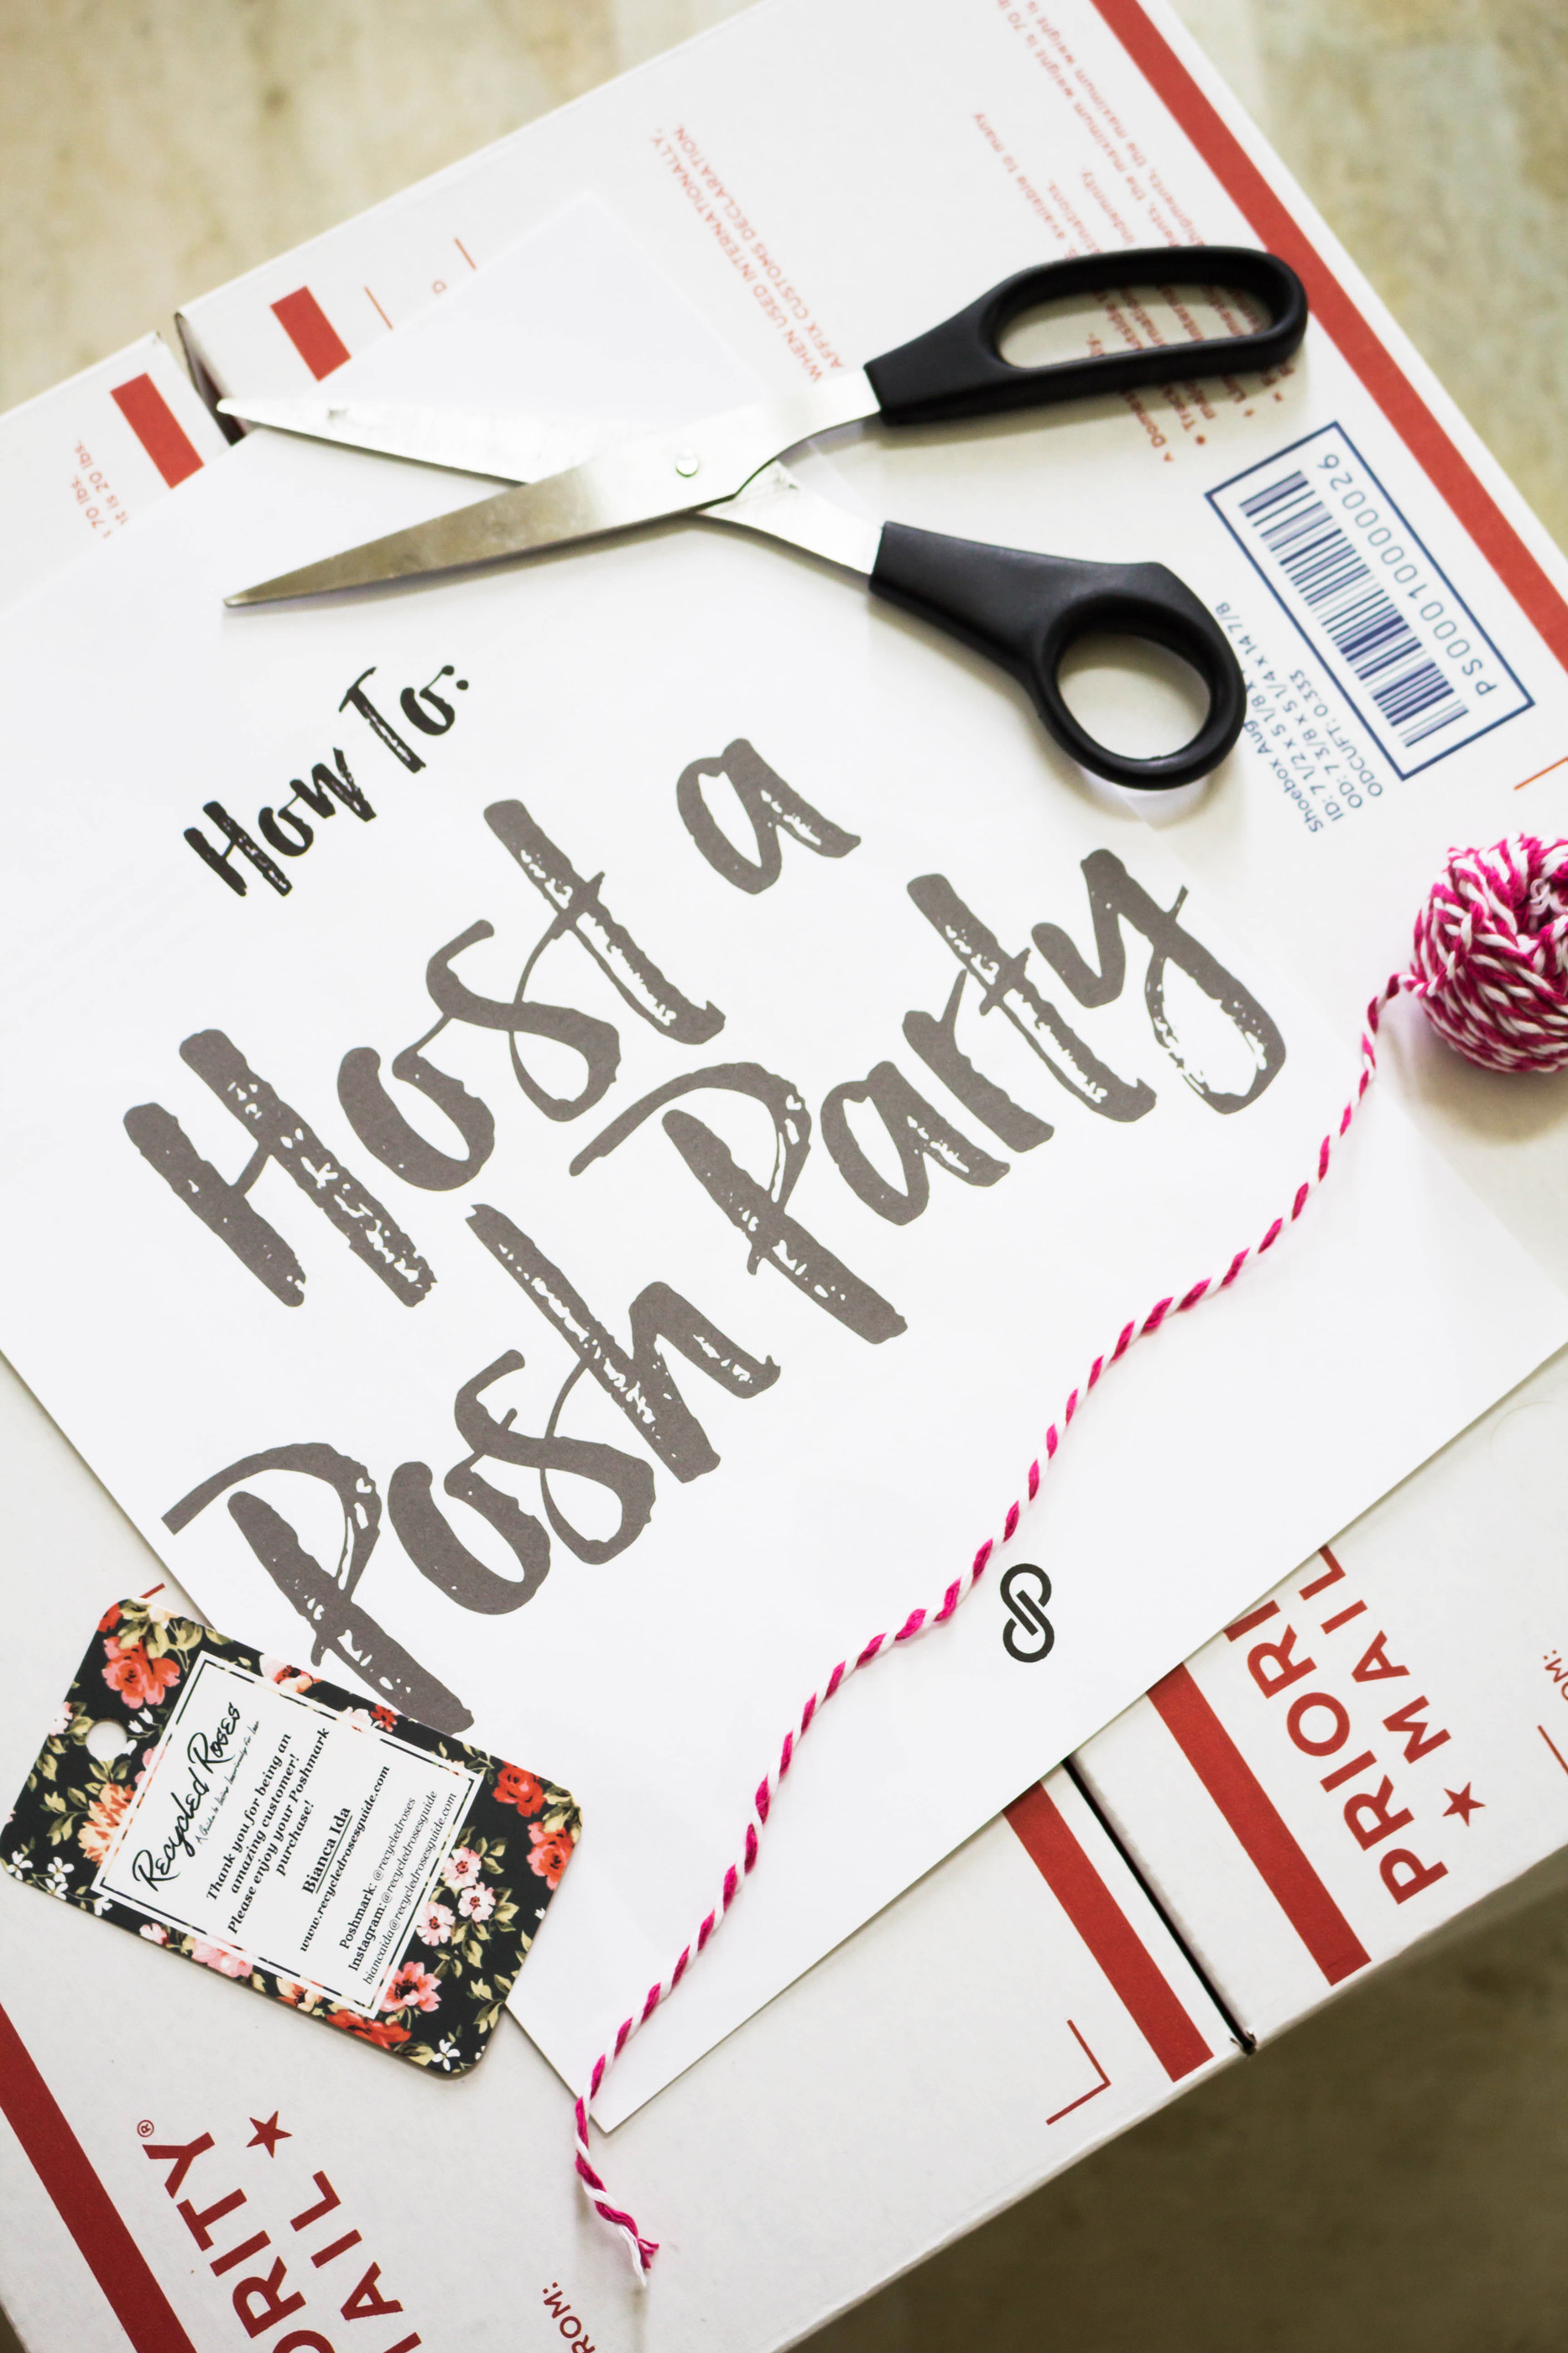 How to Be a Good Party Host